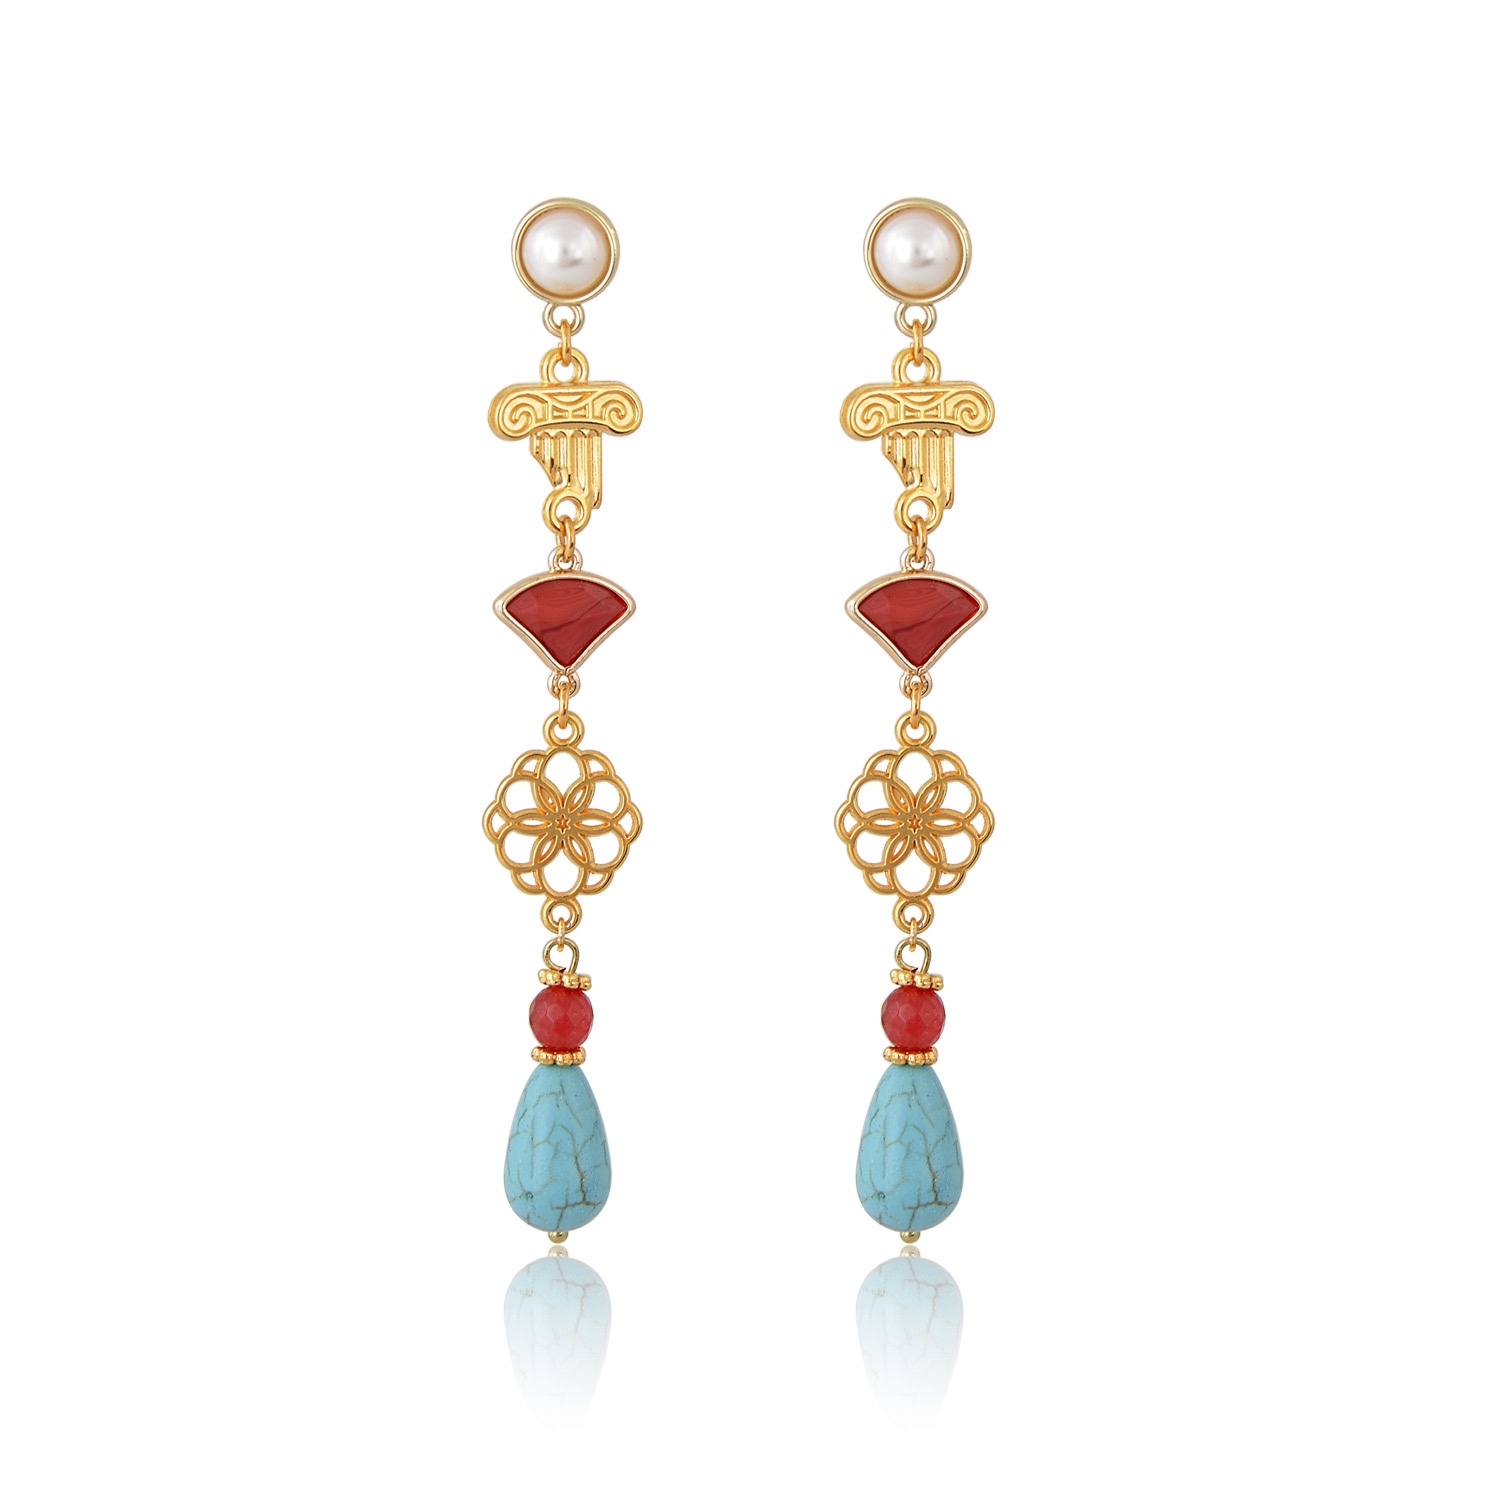 Filigree earrings with Ionic column. These exquisite drop earrings are a fusion of Greek and Bohemian styles, boasting stunning red and turquoise hues. Delicately mounted on a pearl stud, they are a colorful and elegant addition to any ensemble. These earrings feature a striking filigree design, incorporating a triangle-shaped red crystal, an ionic column charm, and a turquoise drop, embodying the essence of the endless Greek summer. With their charm and cuteness, wearing these earrings is sure to turn heads on any occasion.